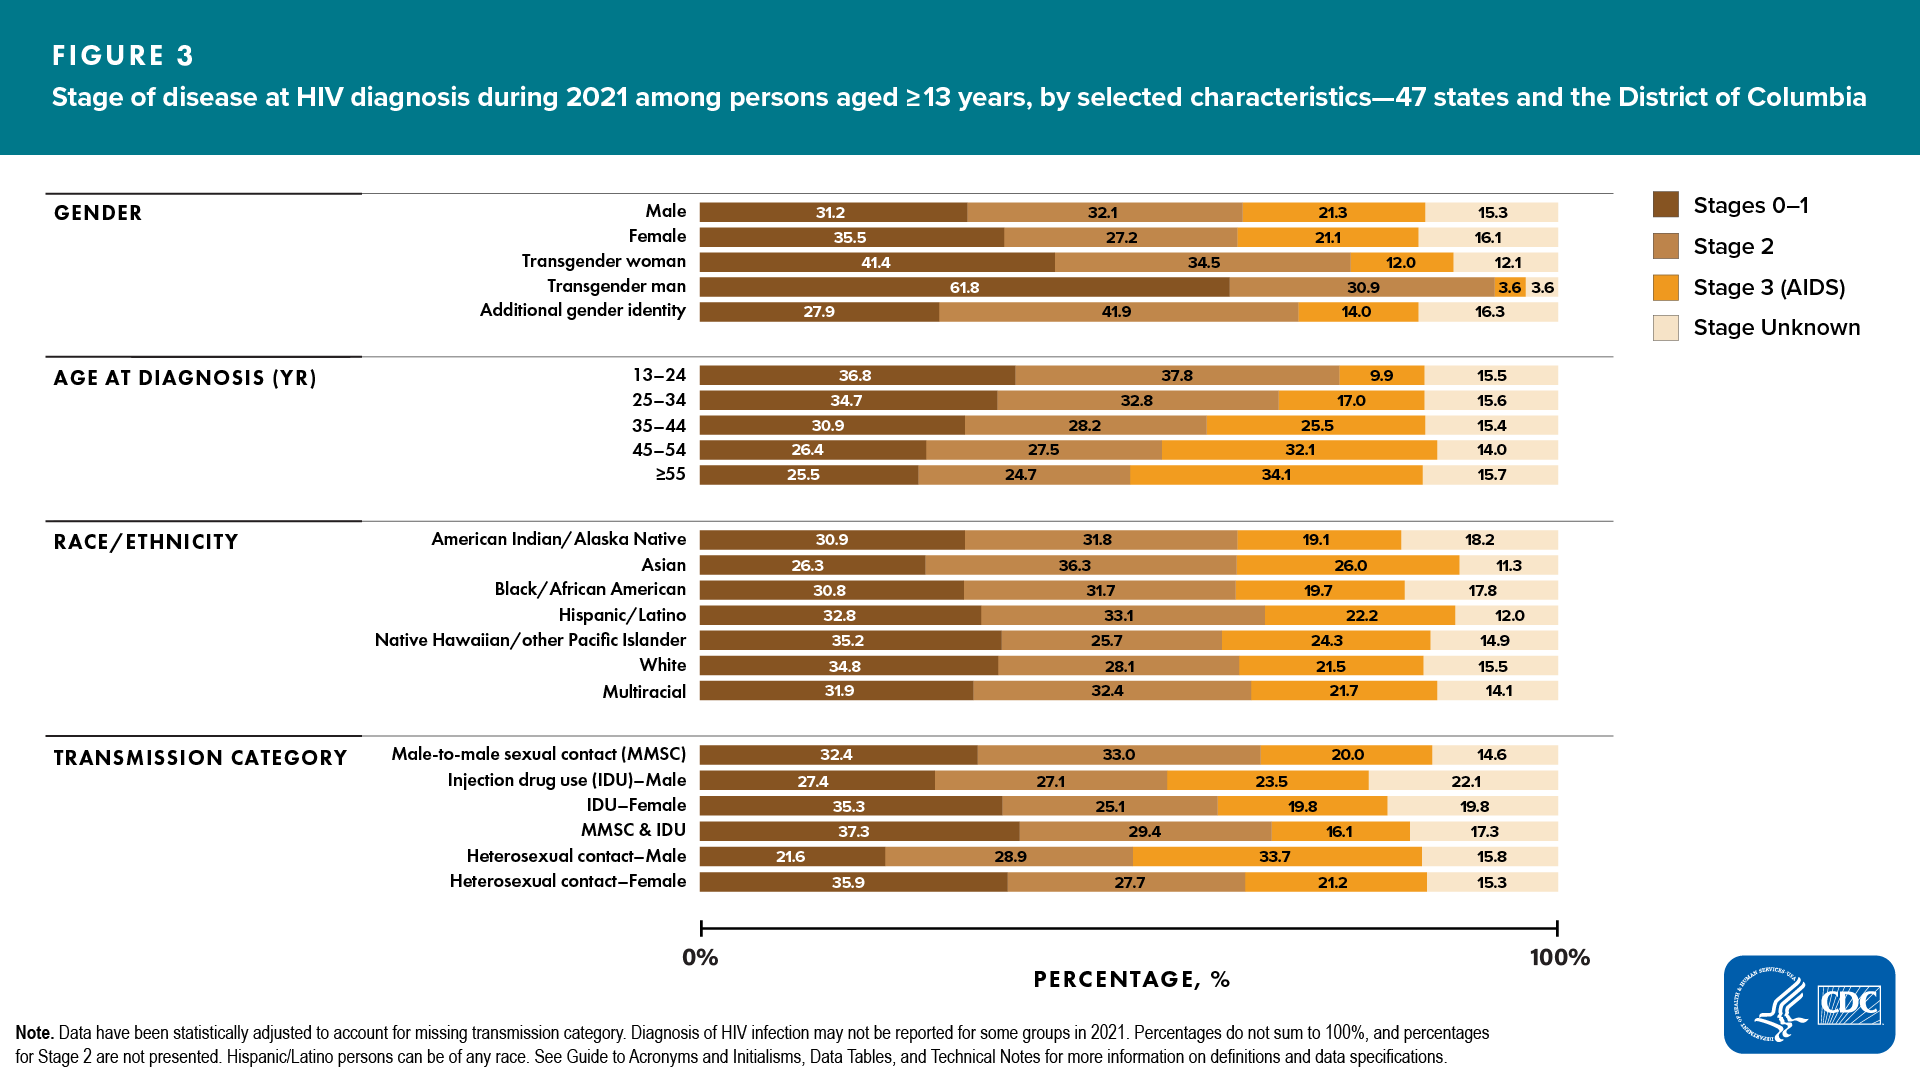 Figure 3. Stage of disease at HIV diagnosis during 2021 among persons aged ≥13 years, by selected characteristics — 47 states and the District of Columbia